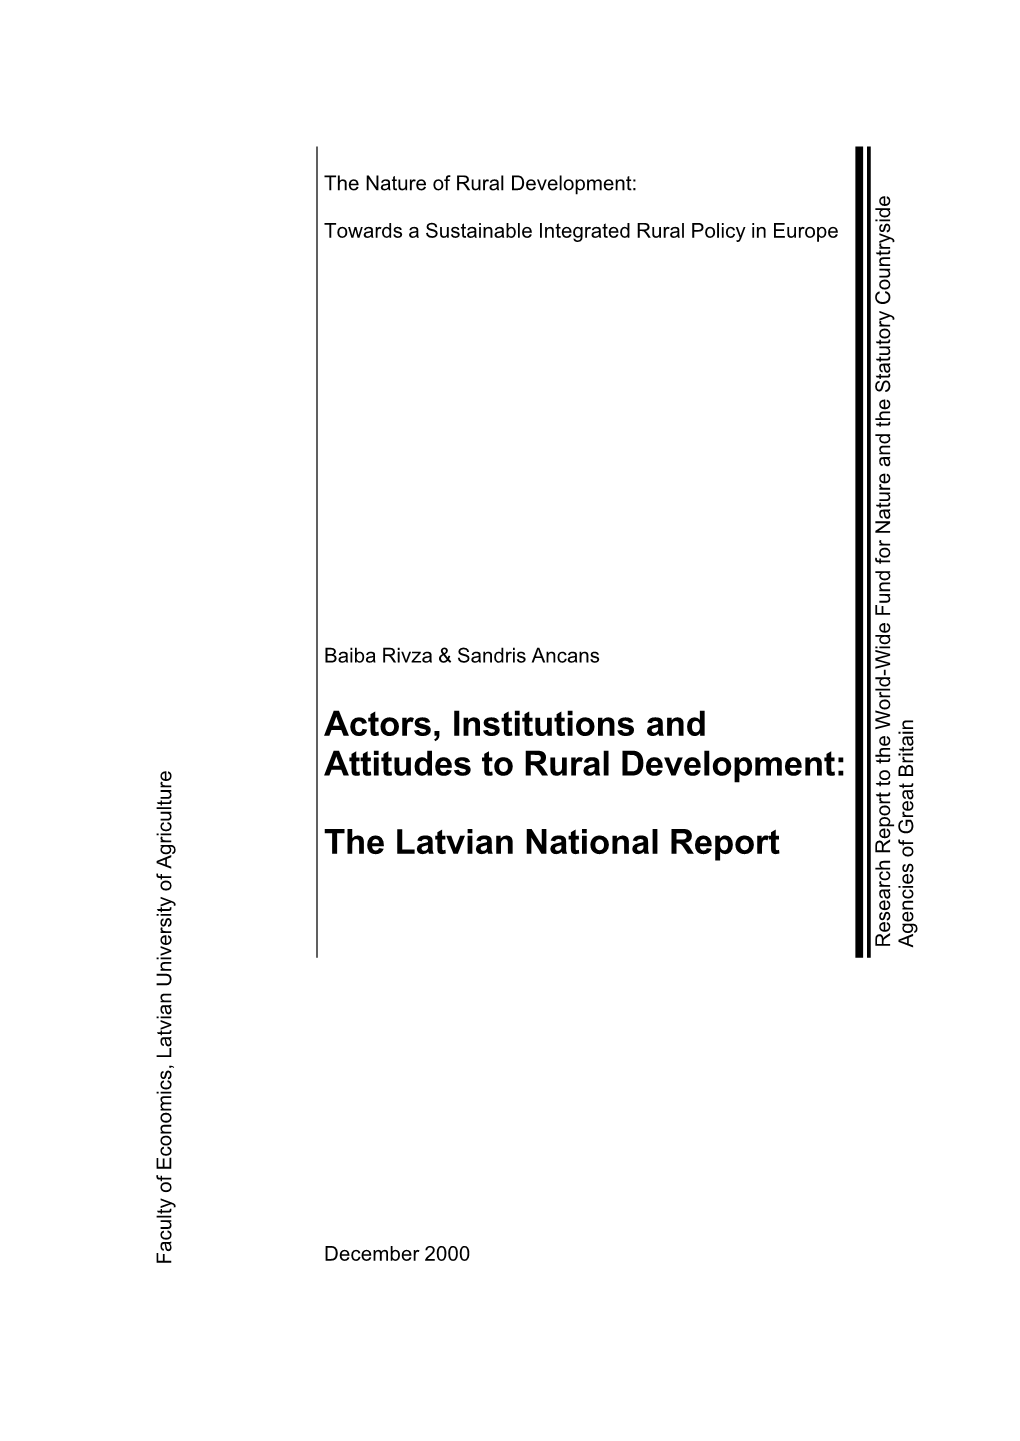 Actors, Institutions and Attitudes to Rural Development: the Latvian